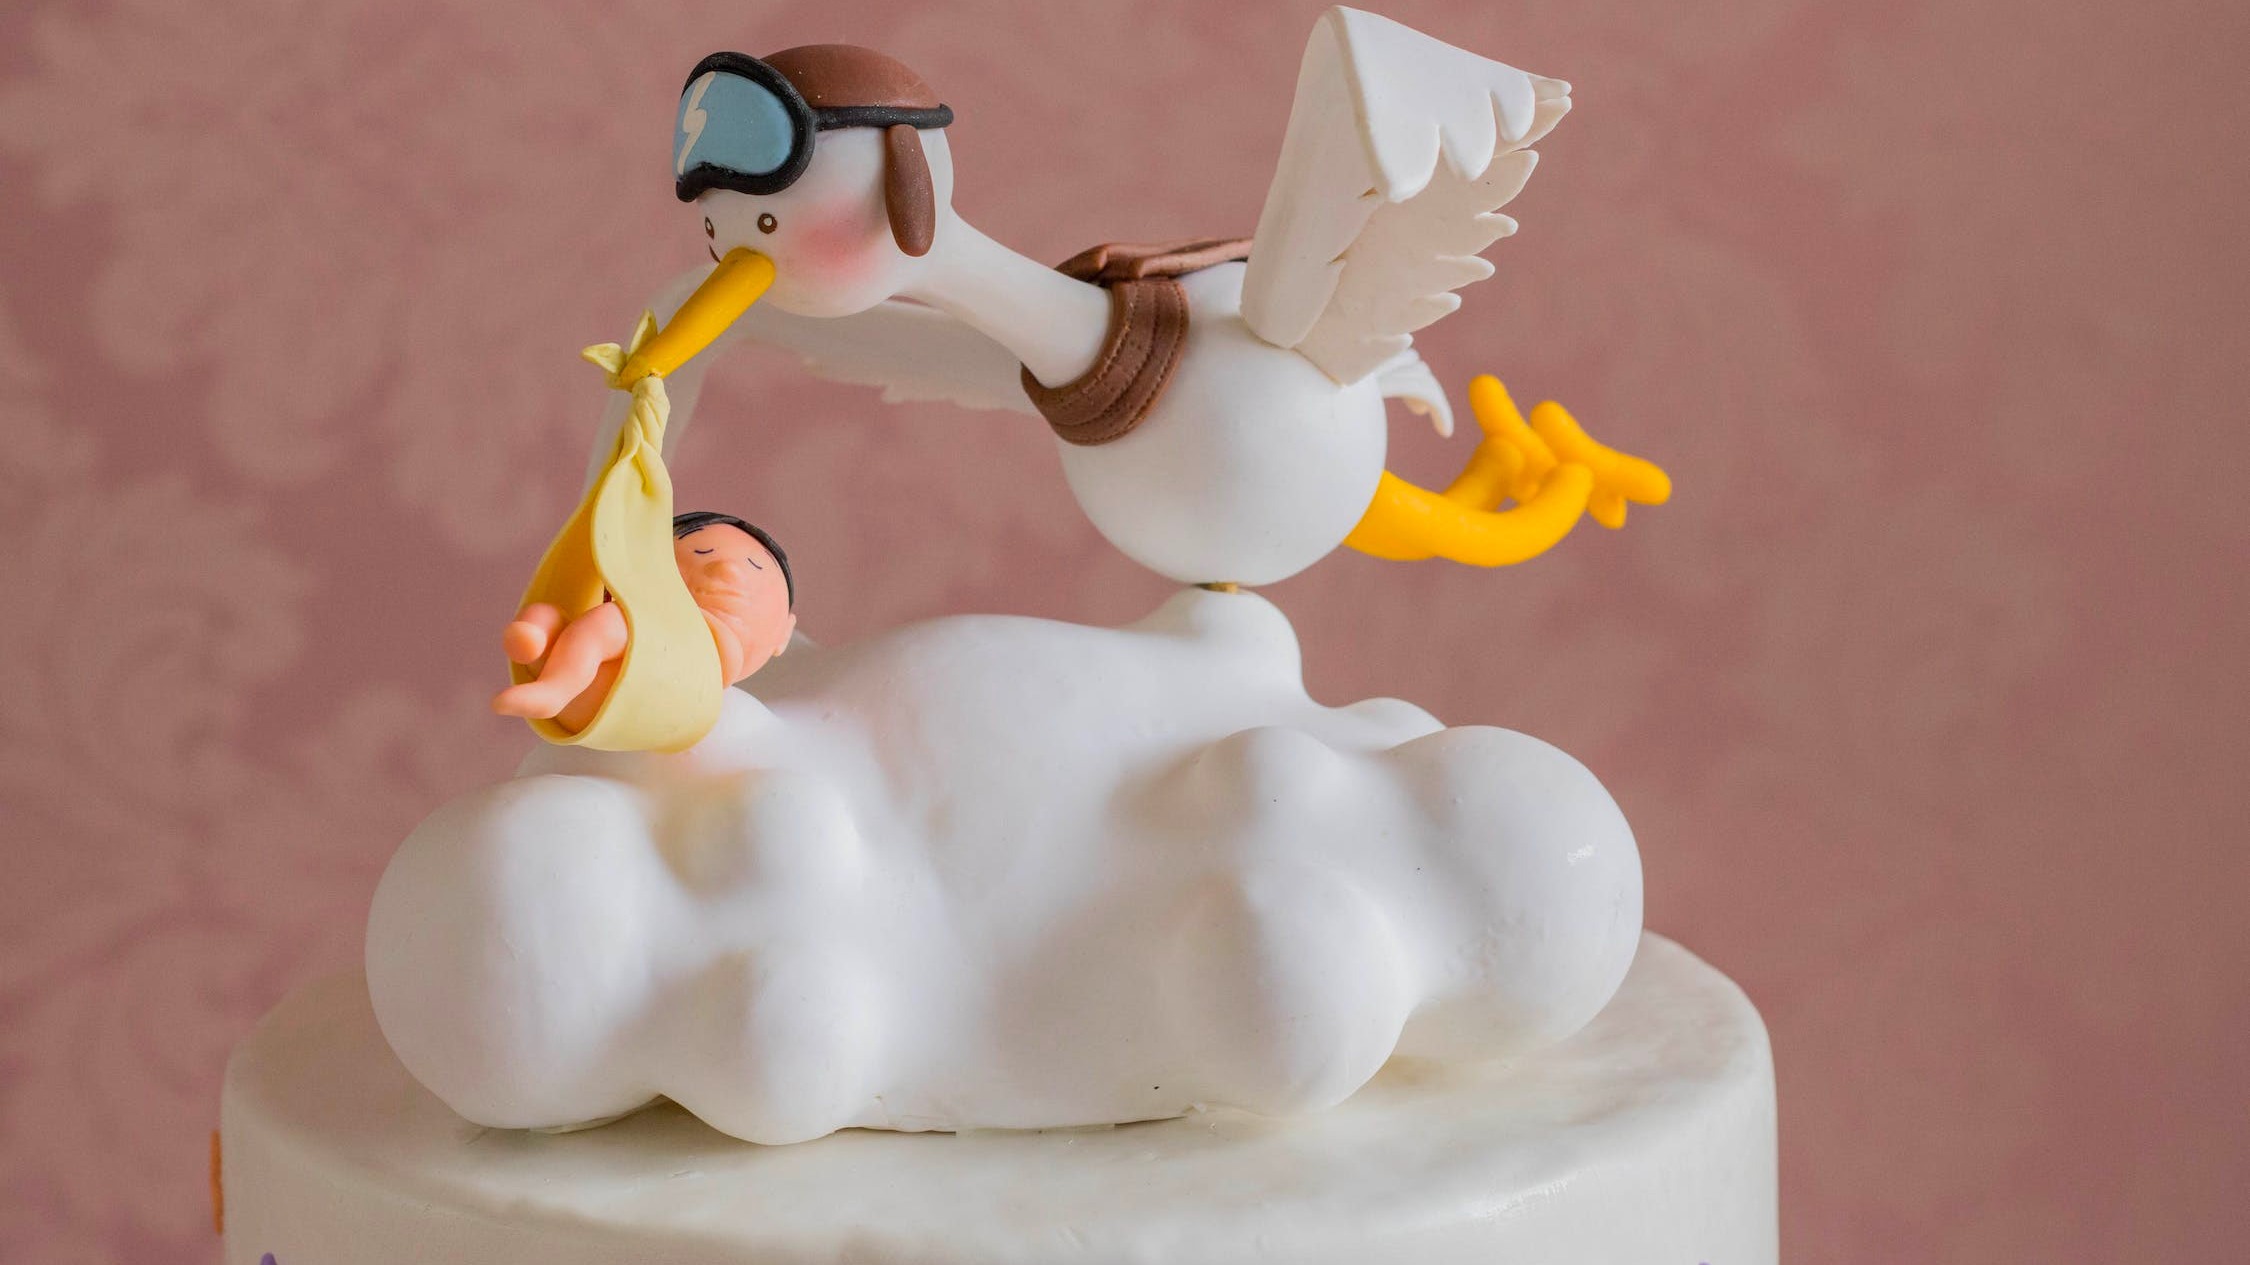 A cake with bird carrying a child over the clouds